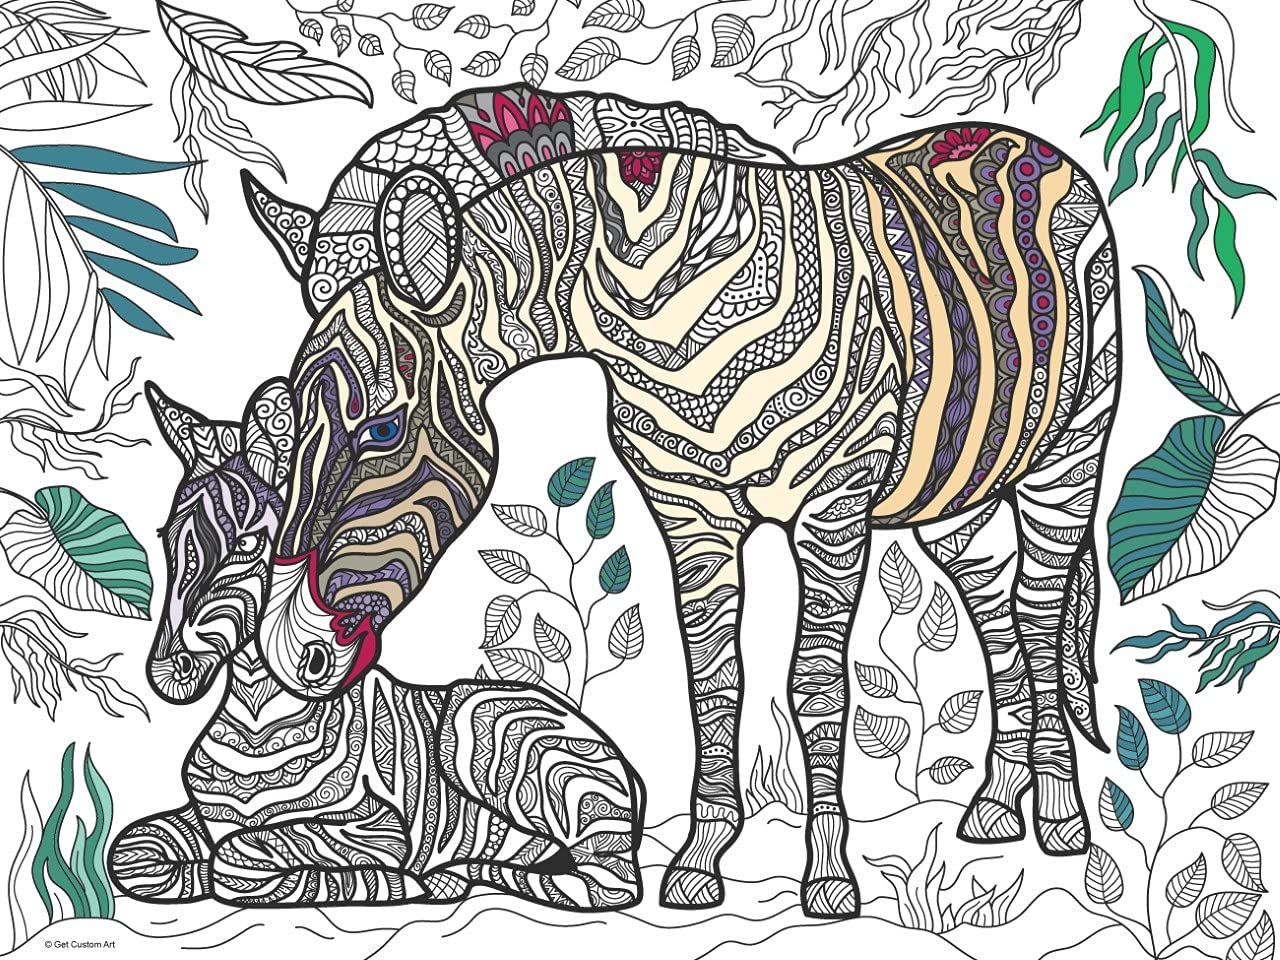 Large Zebra and Calf Coloring Poster – Animal Art for Kids and Adults | DIY Stress Relief Coloring Poster